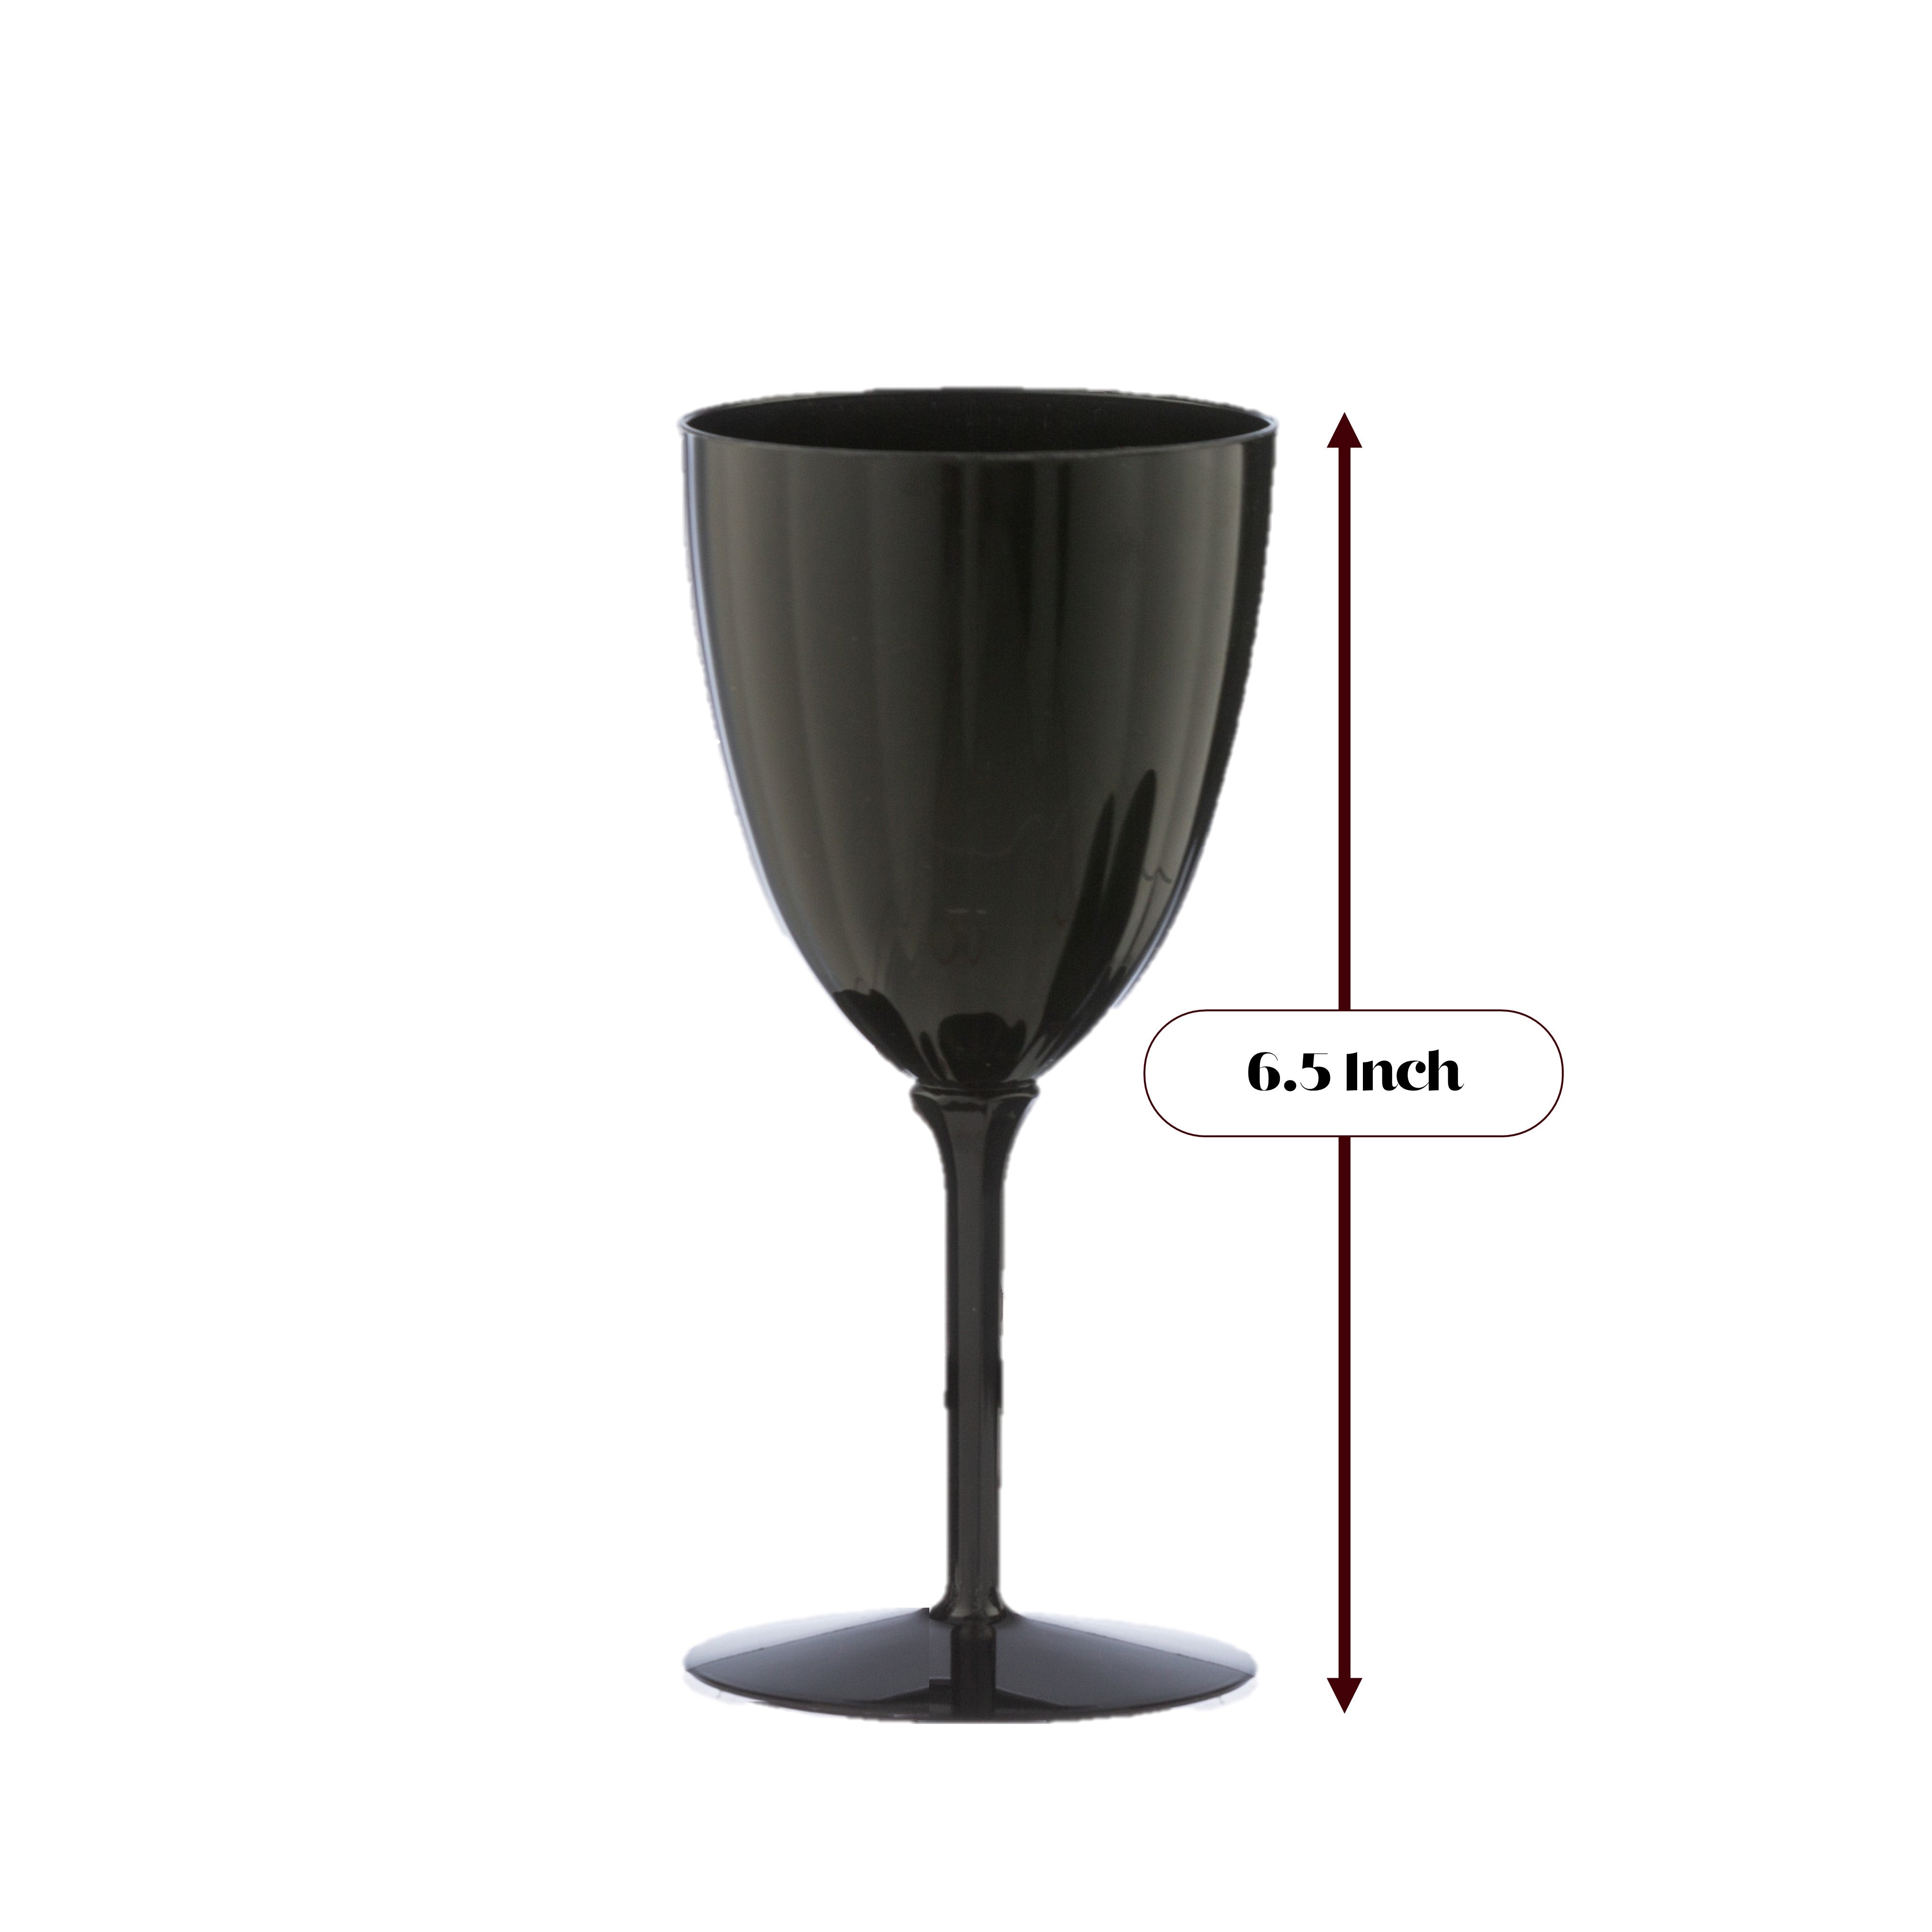 7 oz Plastic Wine Glasses with Stems, Silver Rimmed Disposable